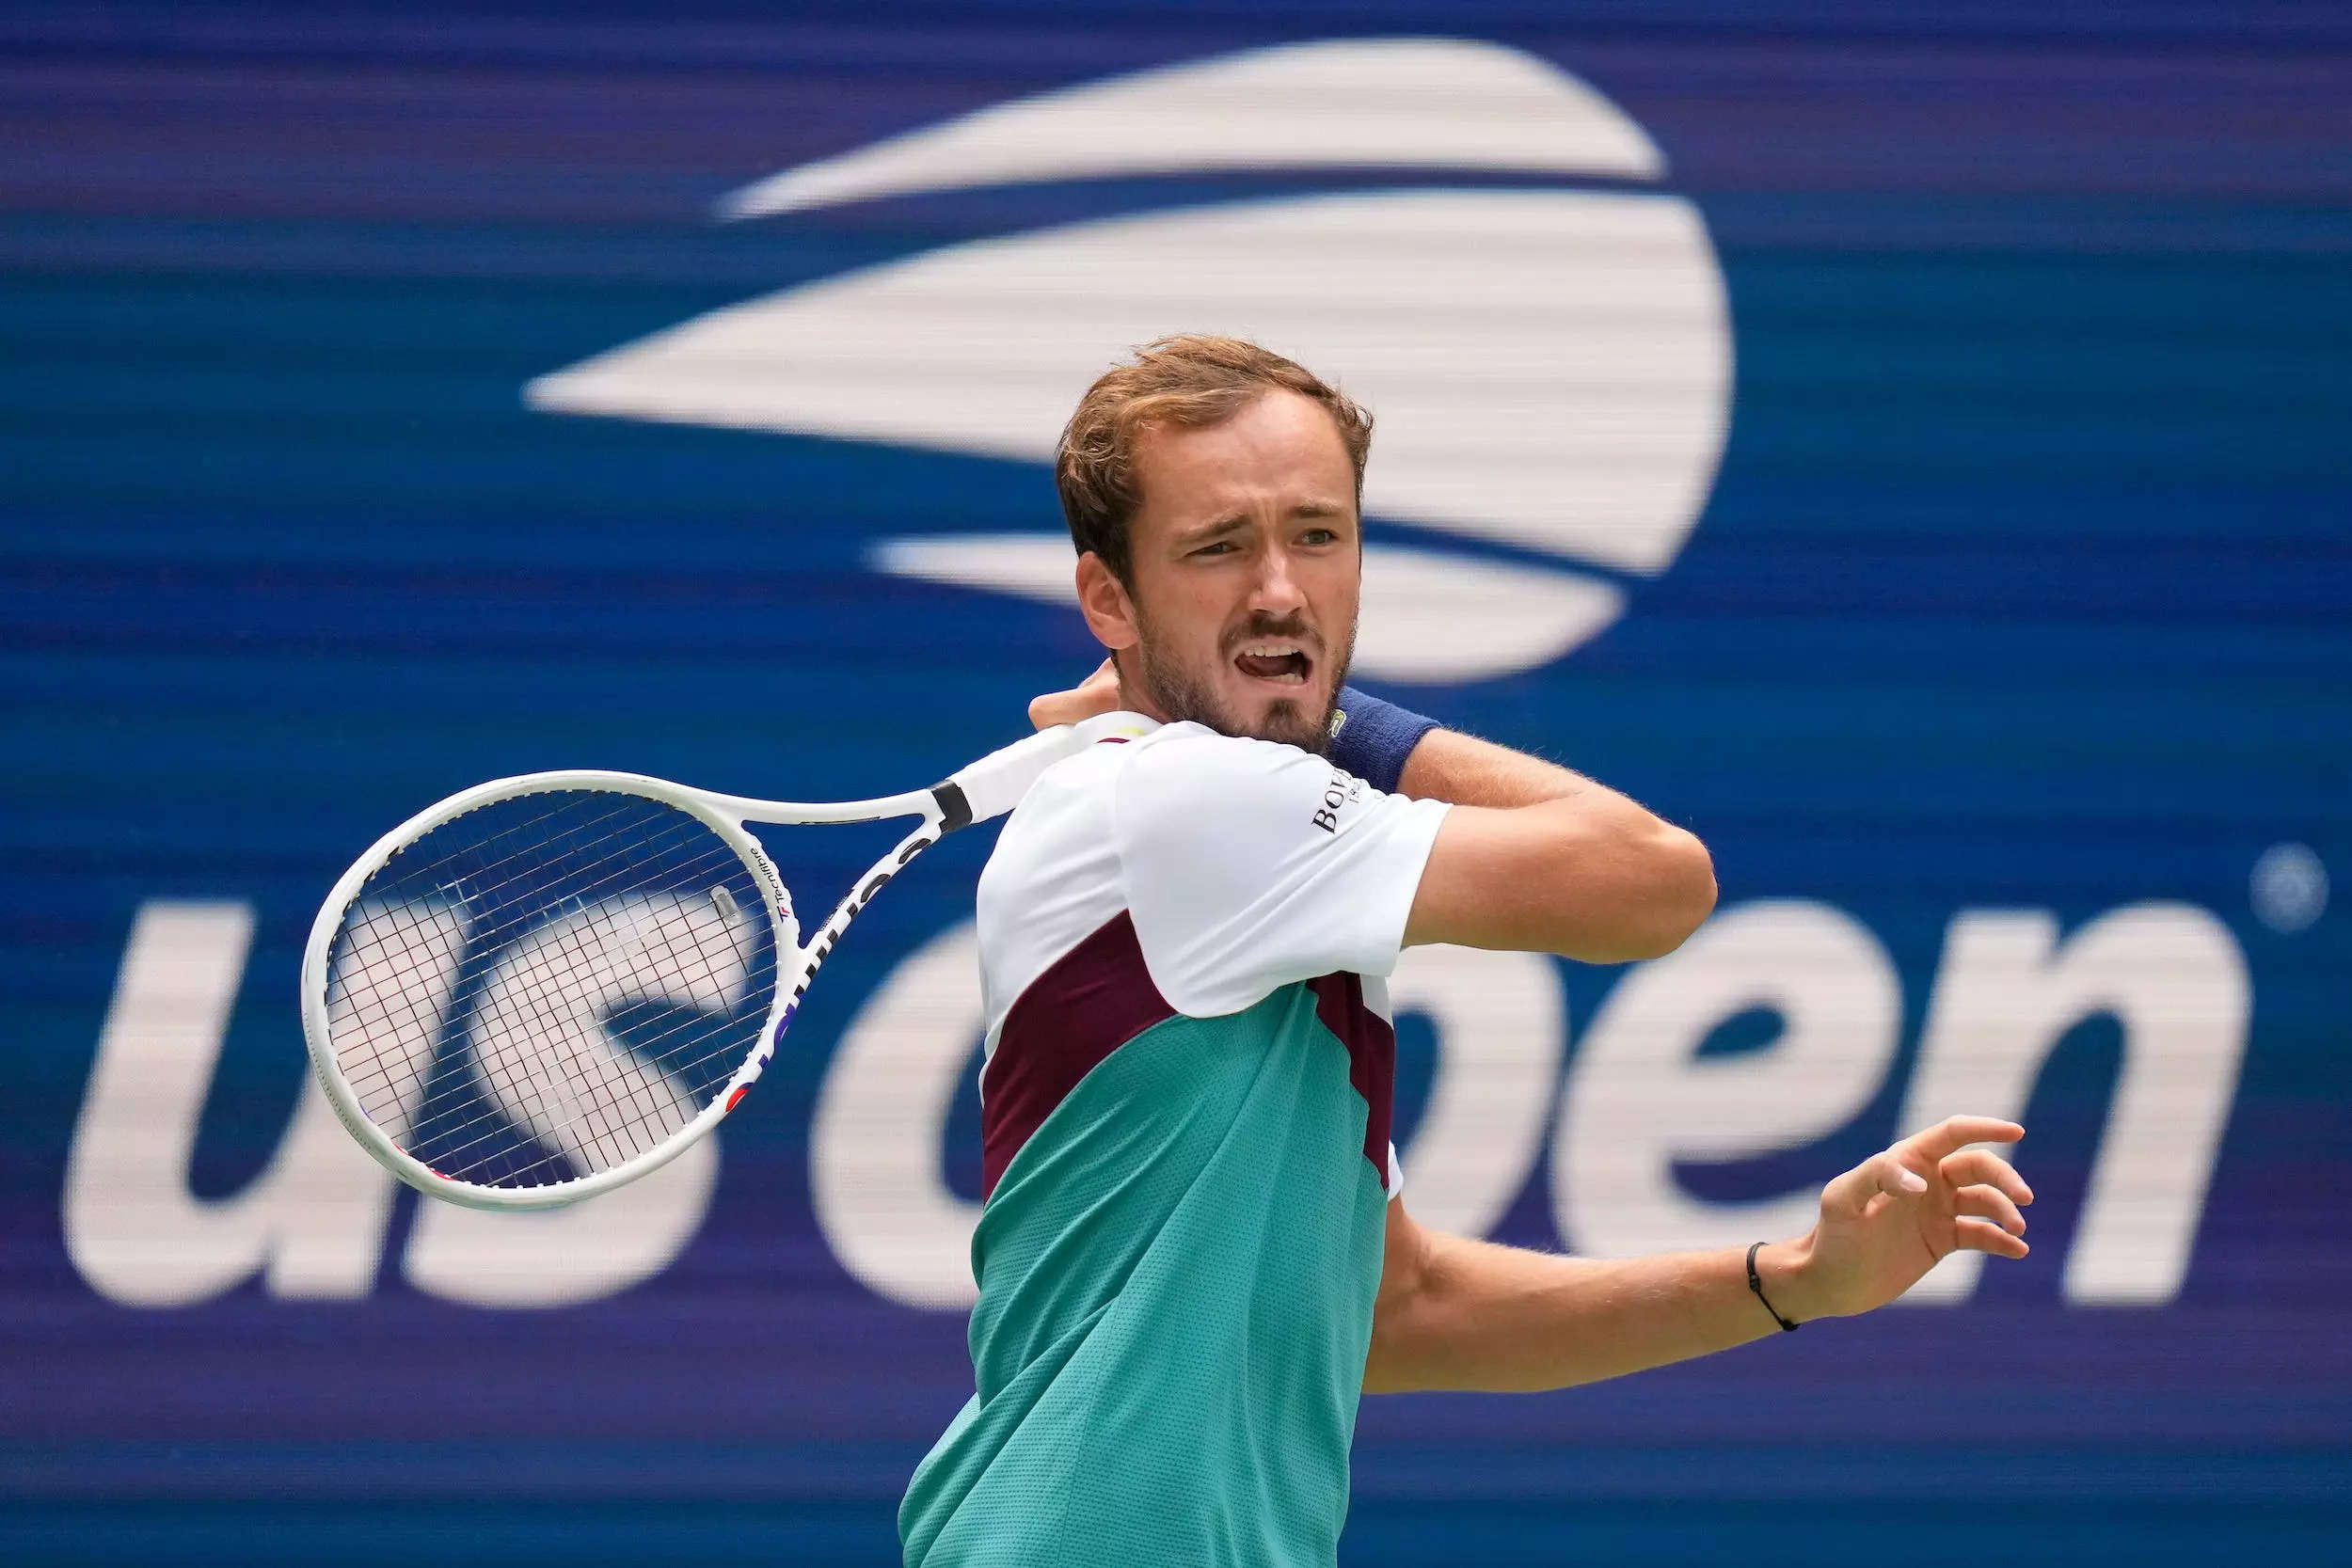 Tennis star Daniil Medvedev admitted he uses illegal streams to watch the US Open because his hotel doesnt have ESPN access Business Insider India